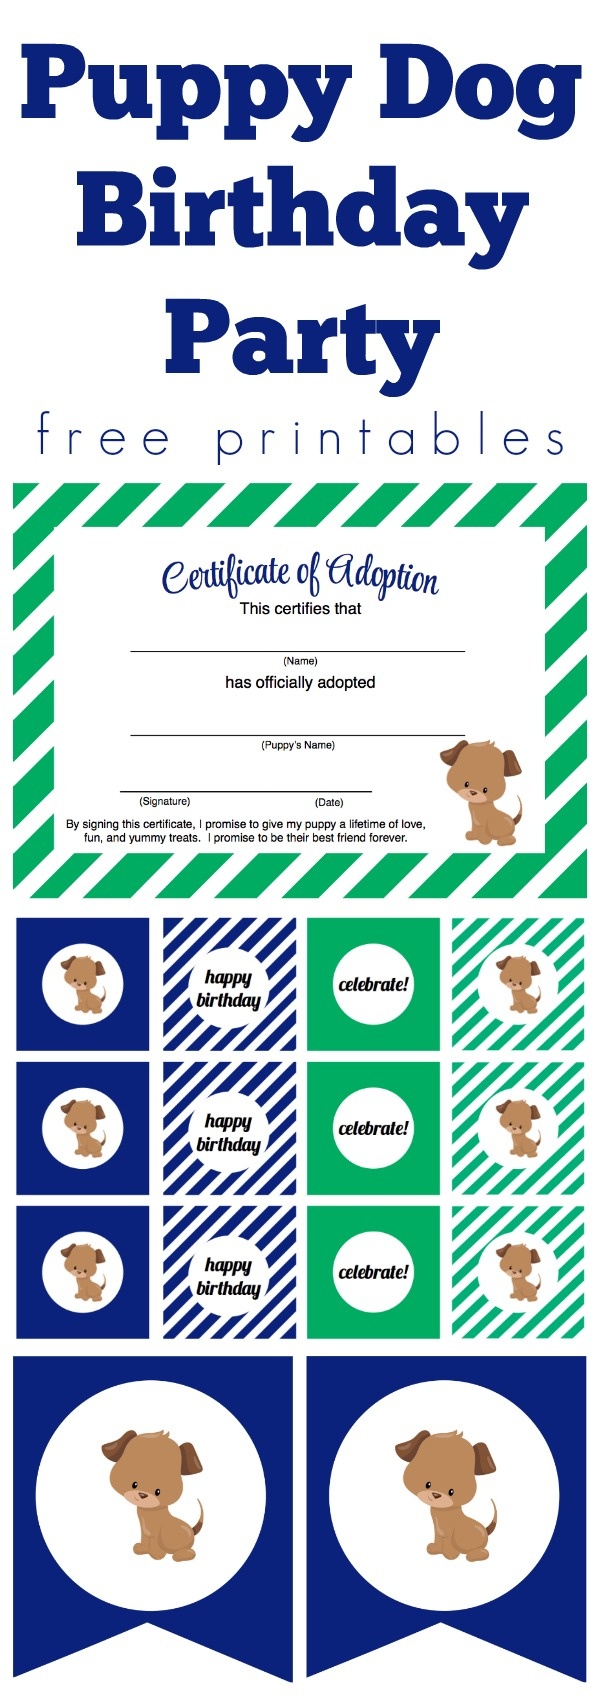 We Heart Parties: Free Printables Puppy Dog Party Free Printables - Free Printable Puppy Dog Birthday Invitations